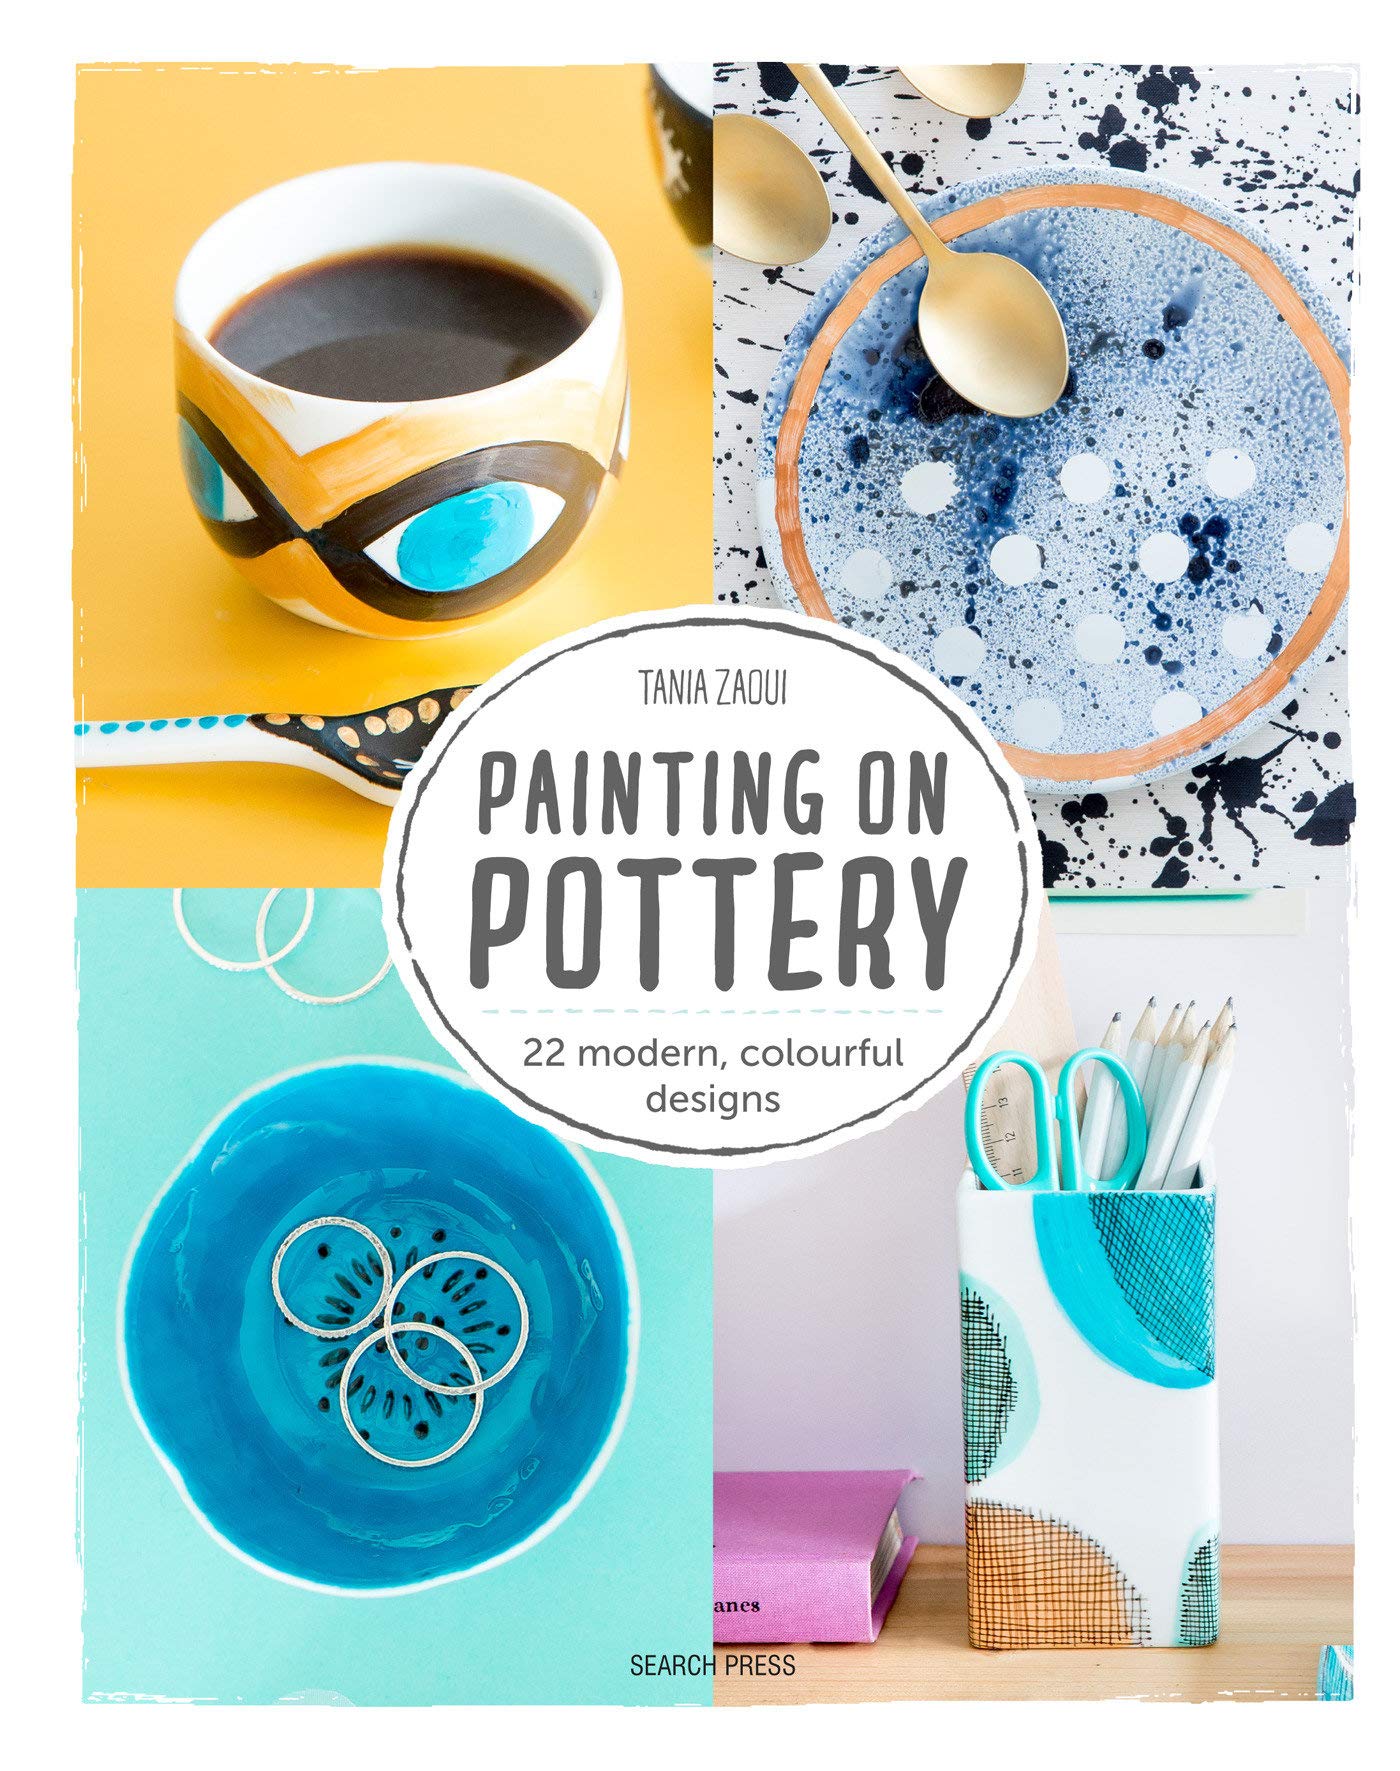 Image for "Painting on Pottery"